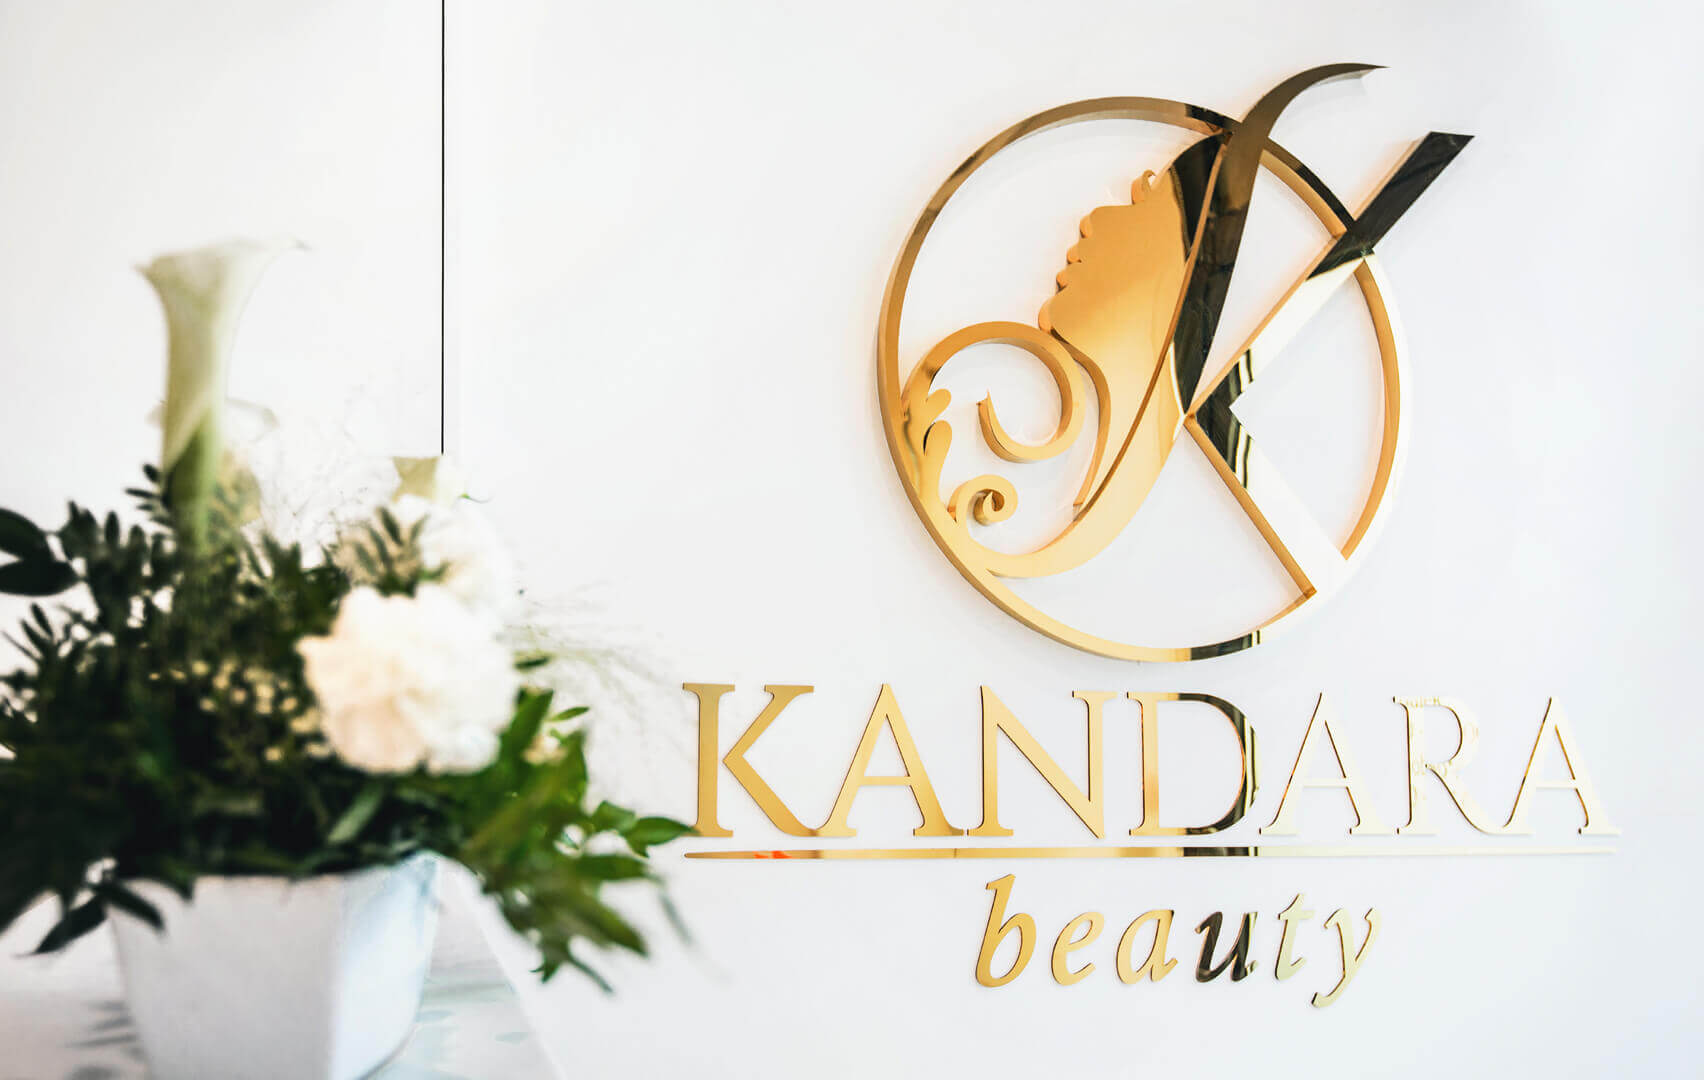 Kandara beauty - Logo with name made of golden stainless steel.